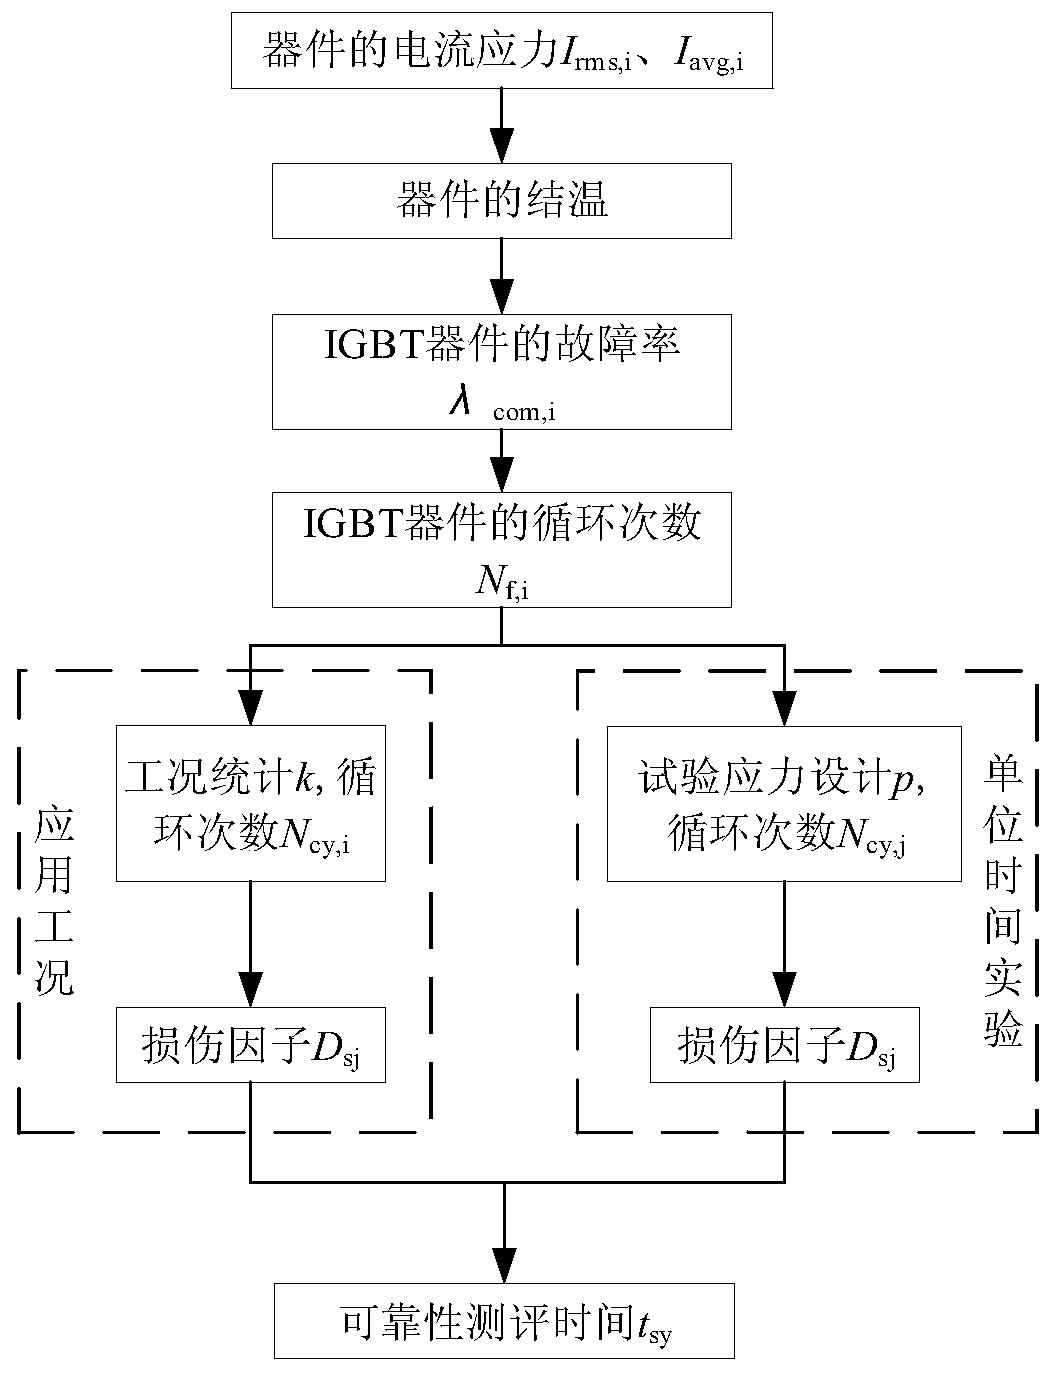 IGBT device power cycle evaluation method based on application condition of MMC converter valve